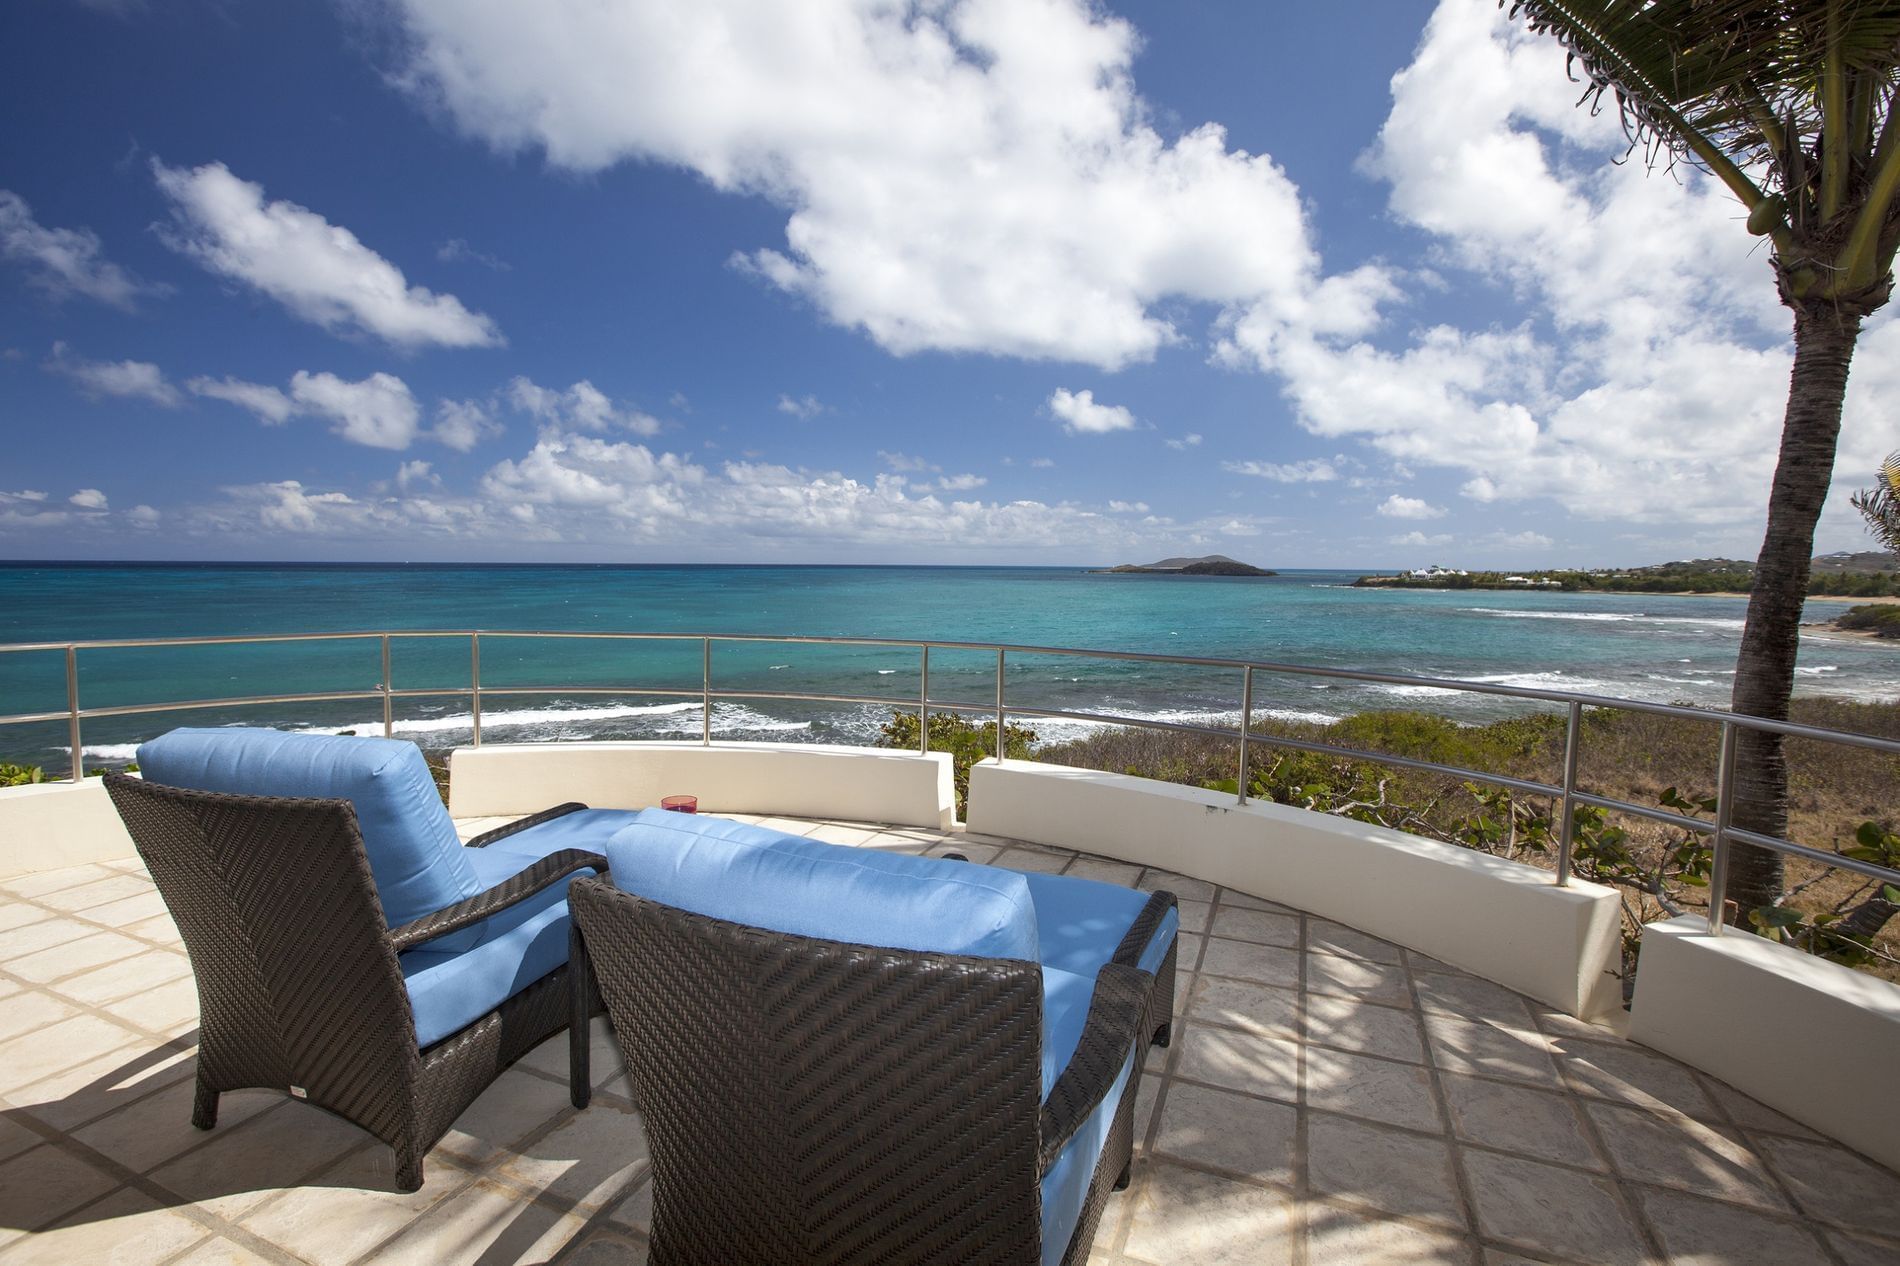 Lounge chairs in Buck Island Suite's Terrace at The Buccaneer Resort St. Croix